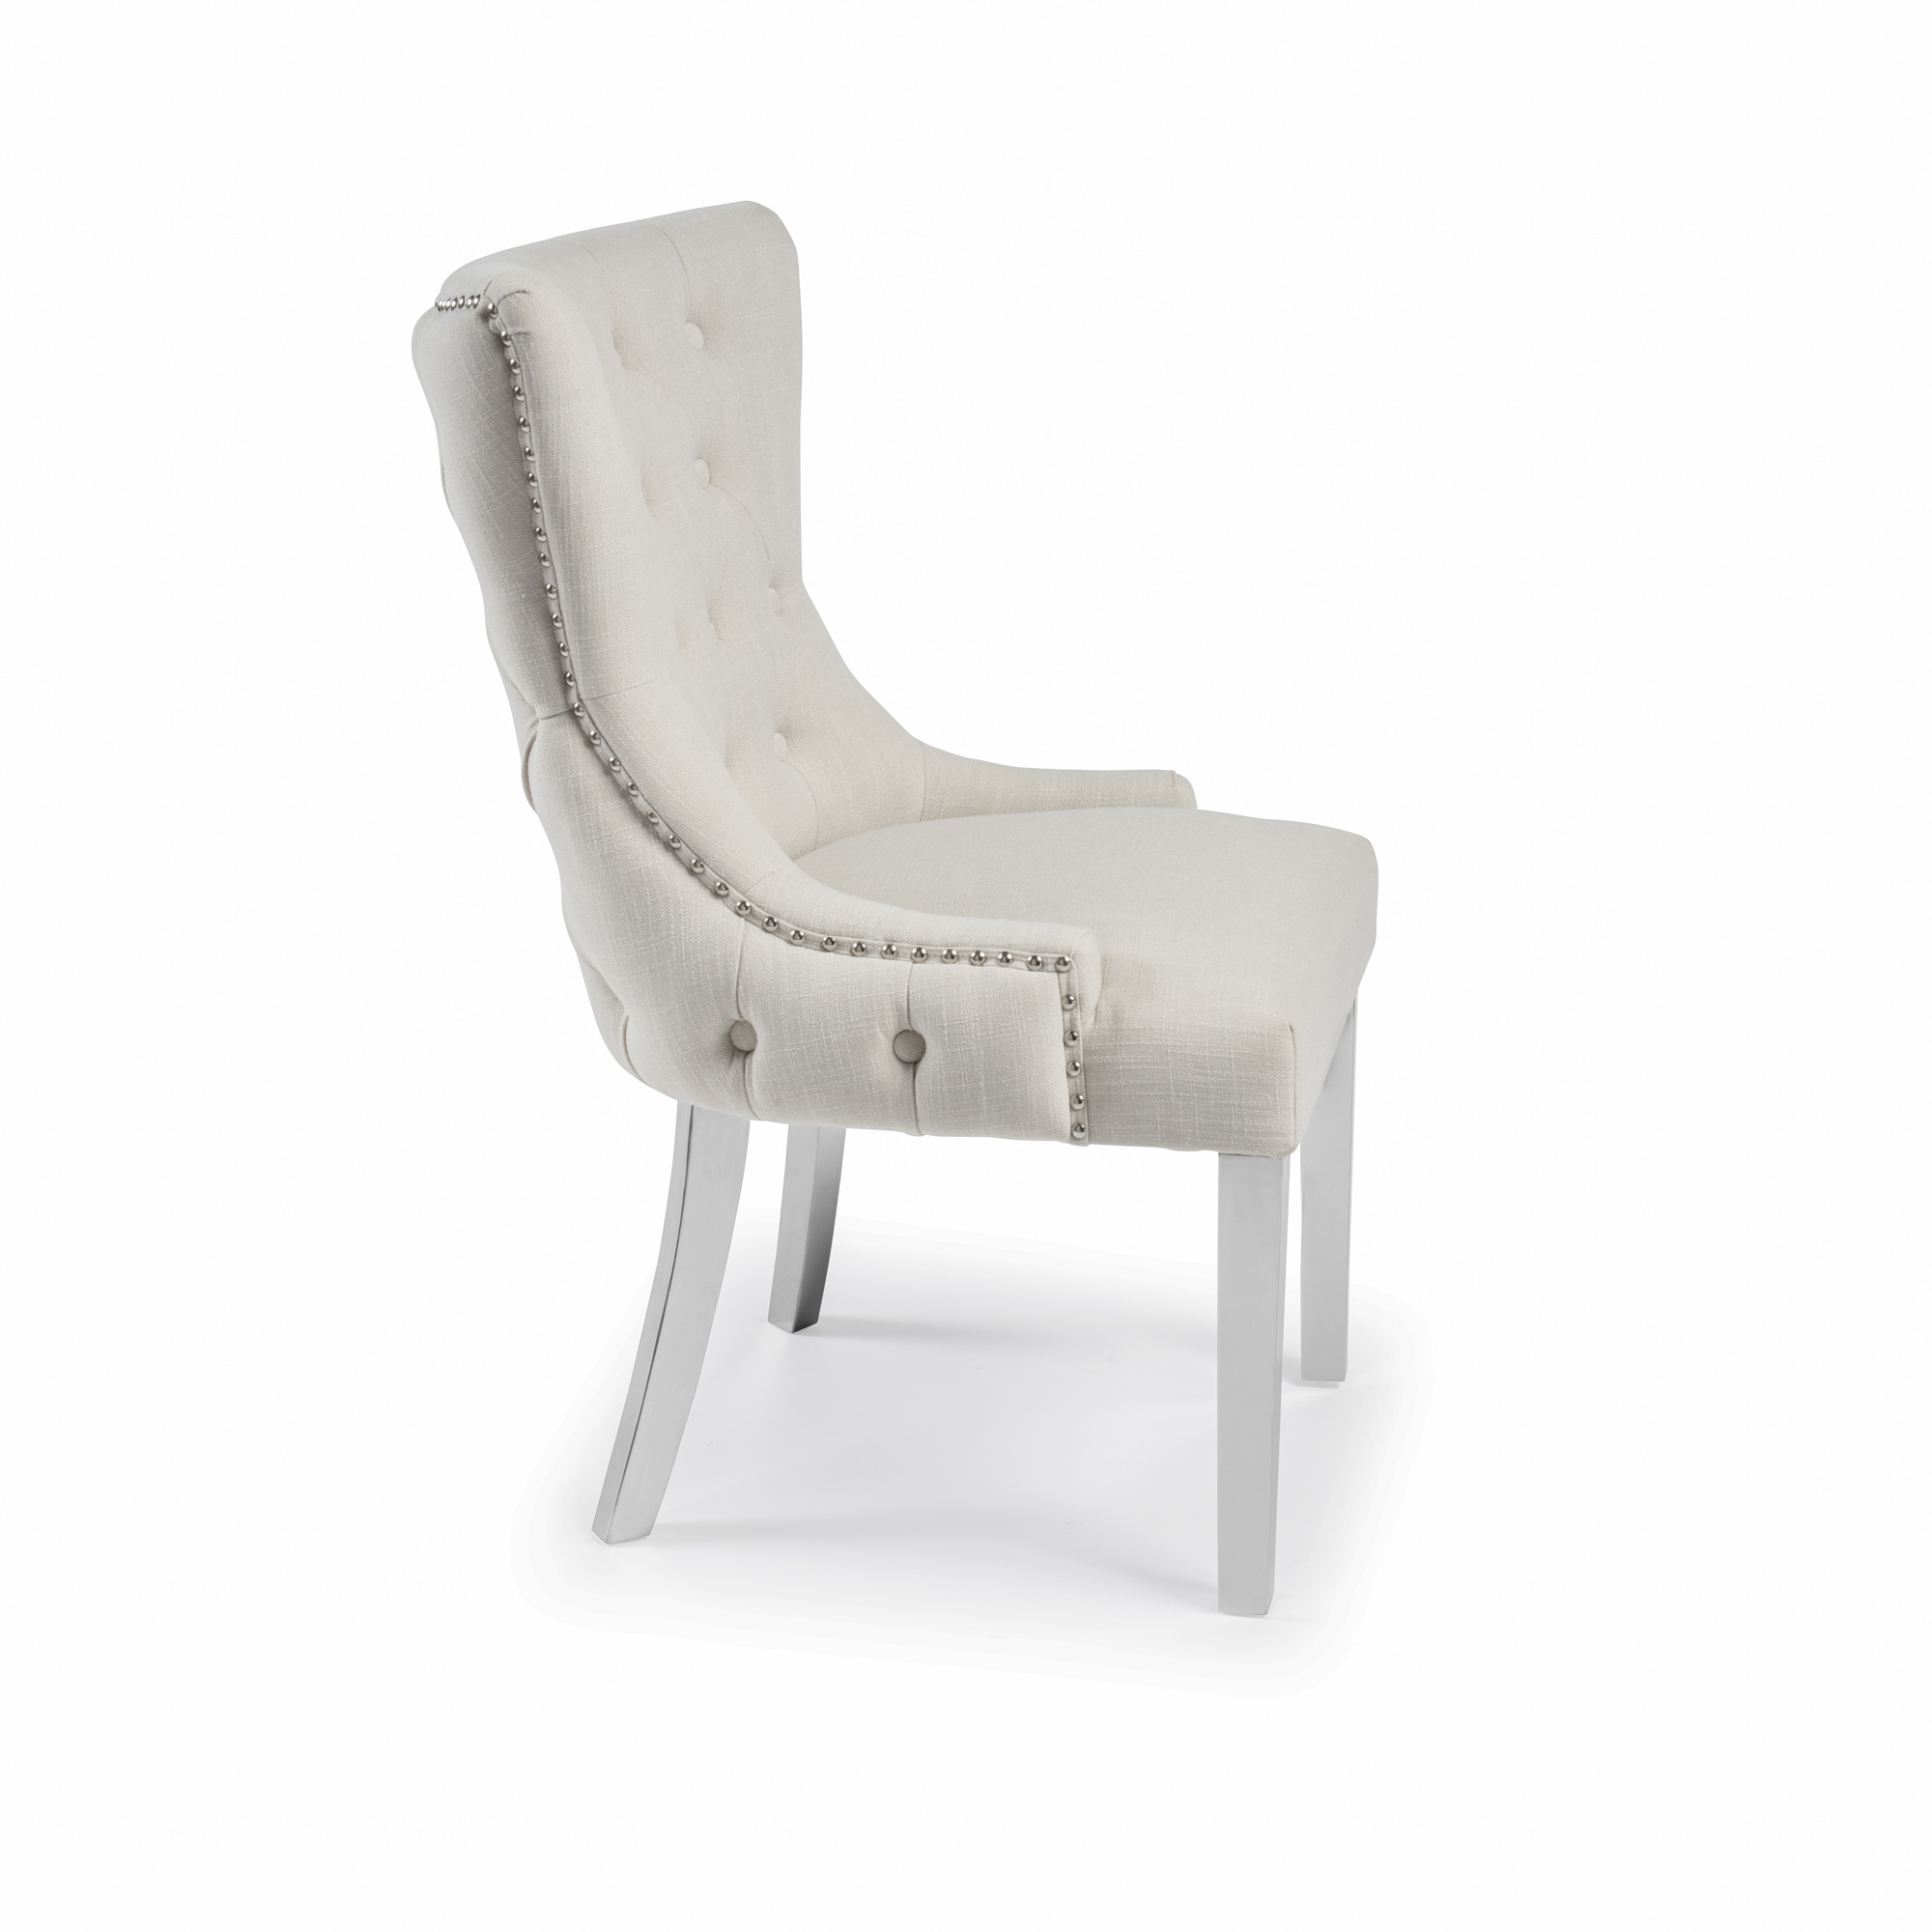 Knightsbridge Natural Linen Buttoned Scoop Dining Chair with Stainless Steel Legs